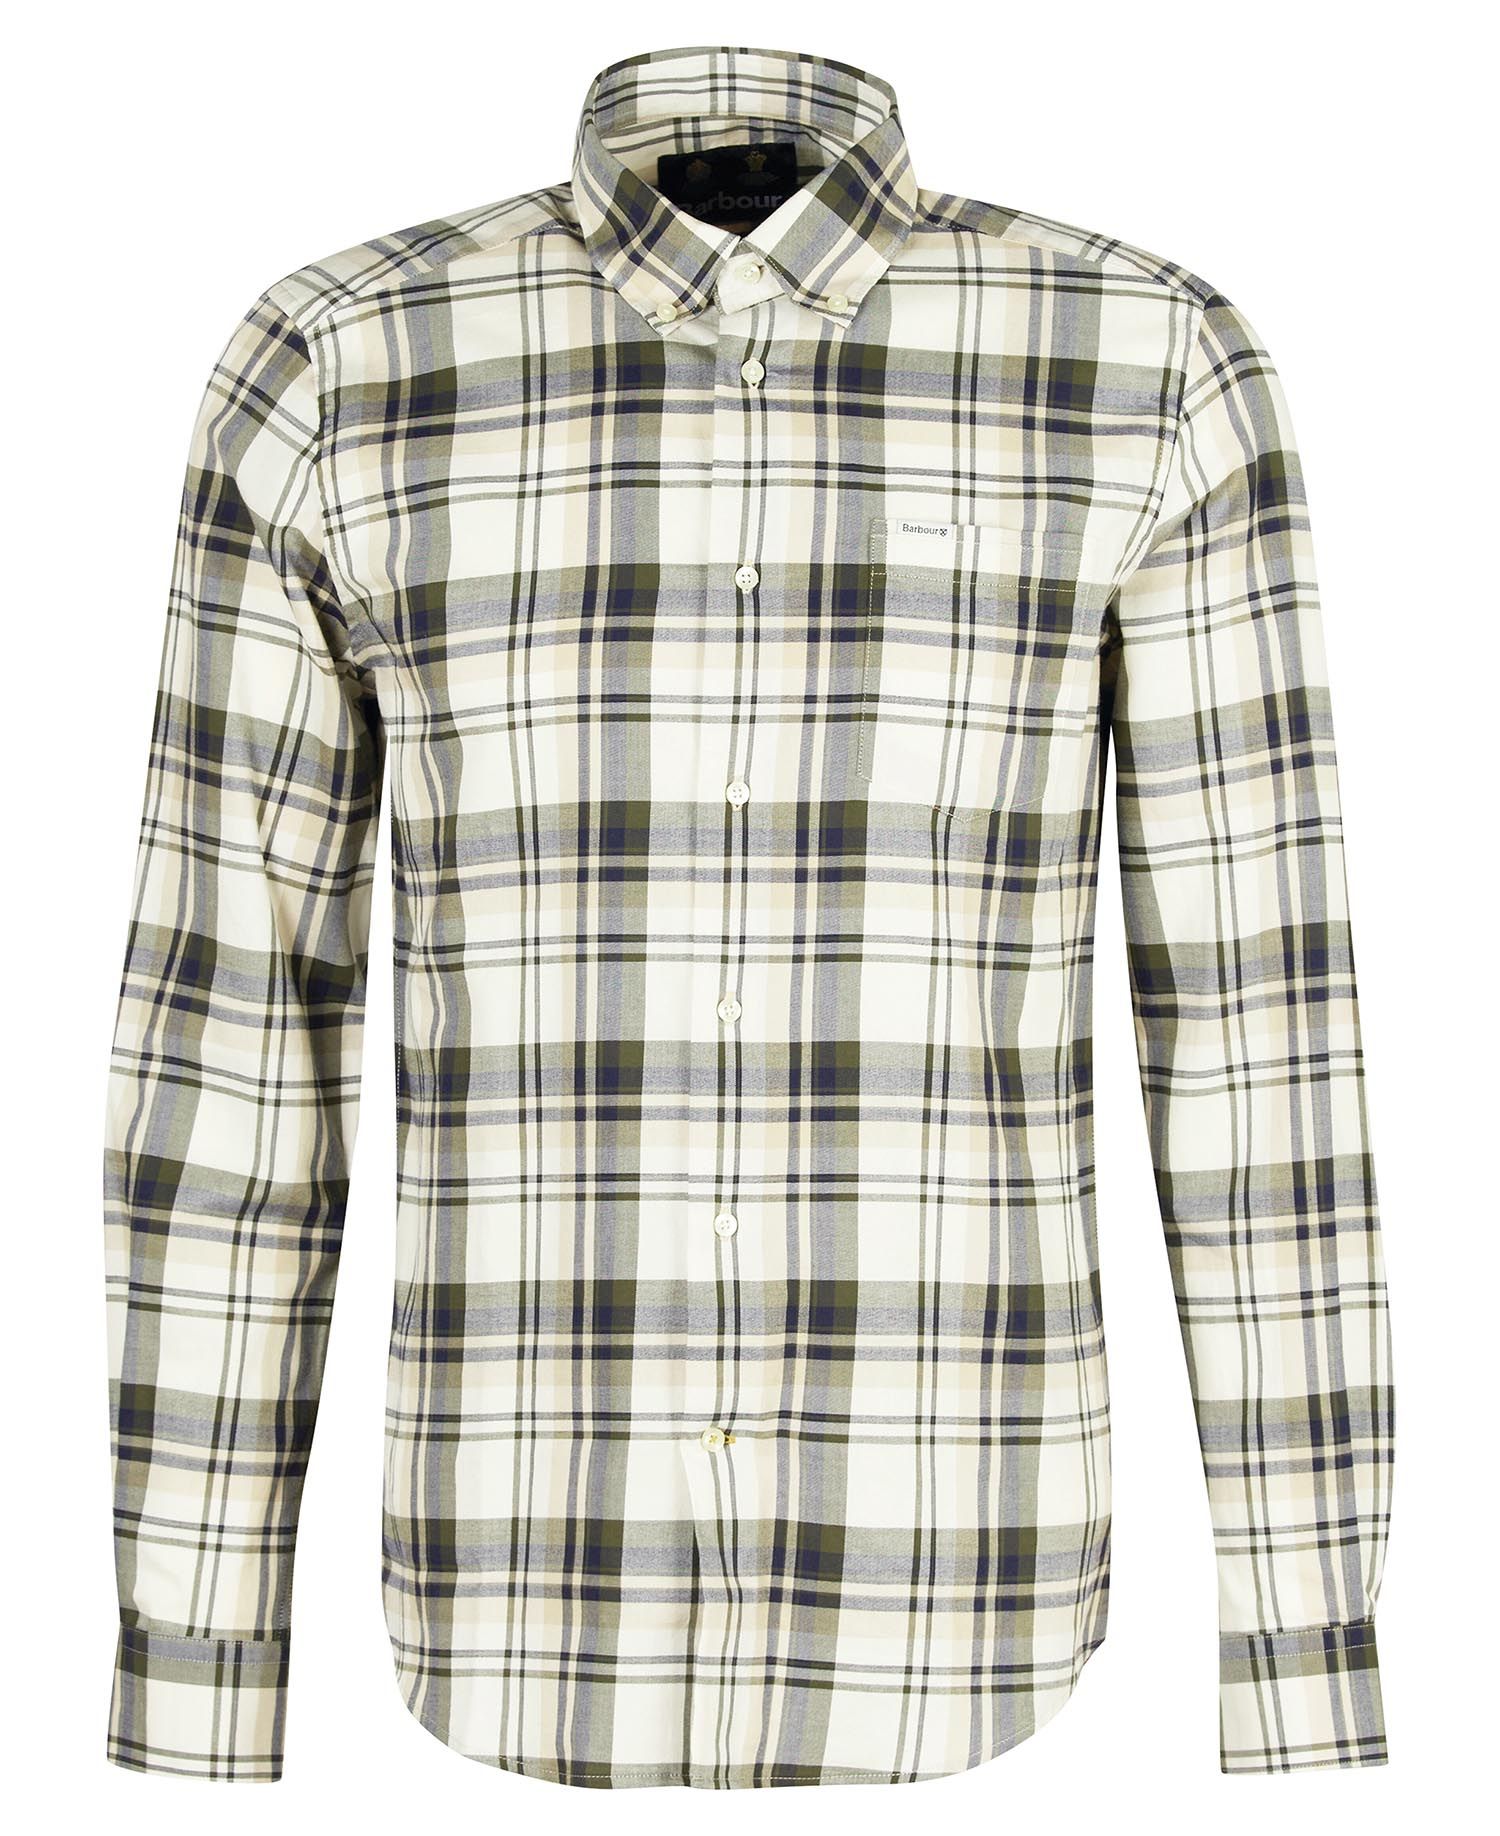 Shop the Barbour Falstone Tailored Checked Shirt today. | Barbour